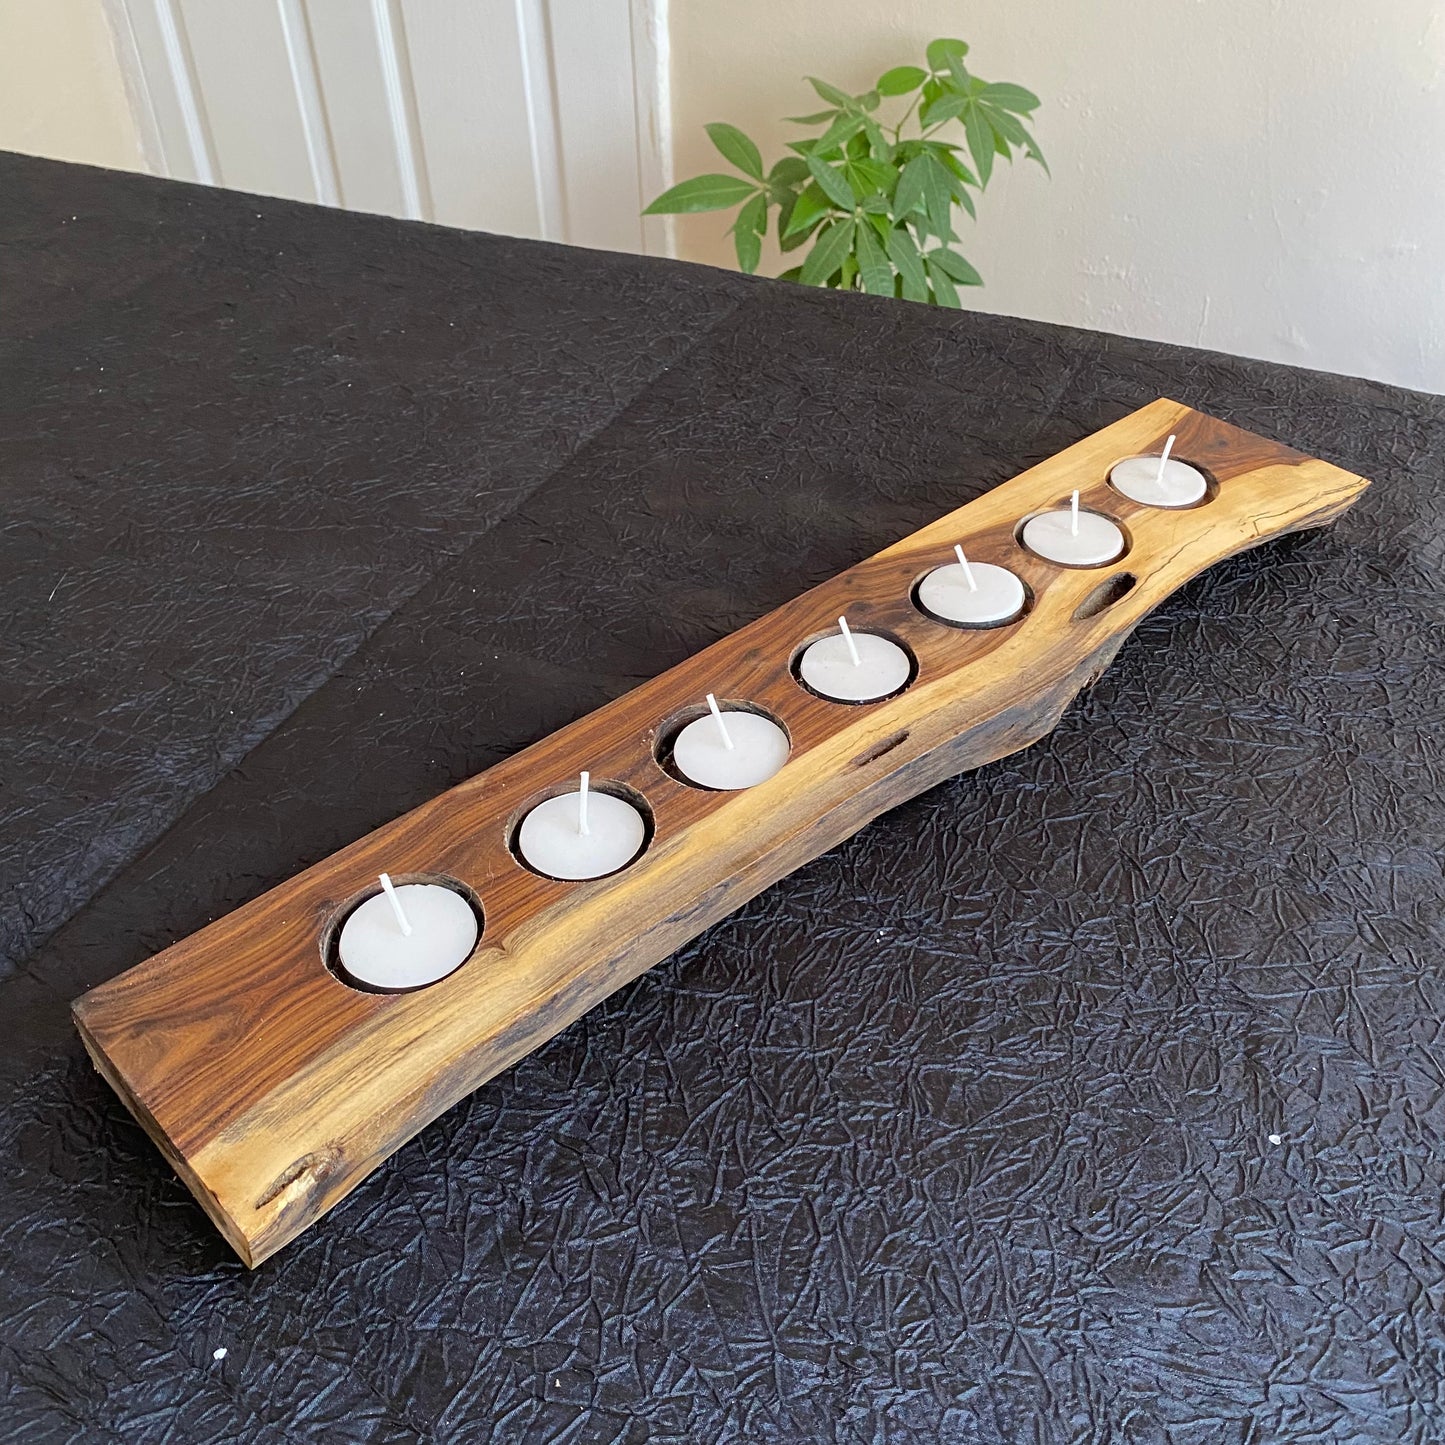 Tambootie Wood Candle Holer - 7 hole for Tea Lights